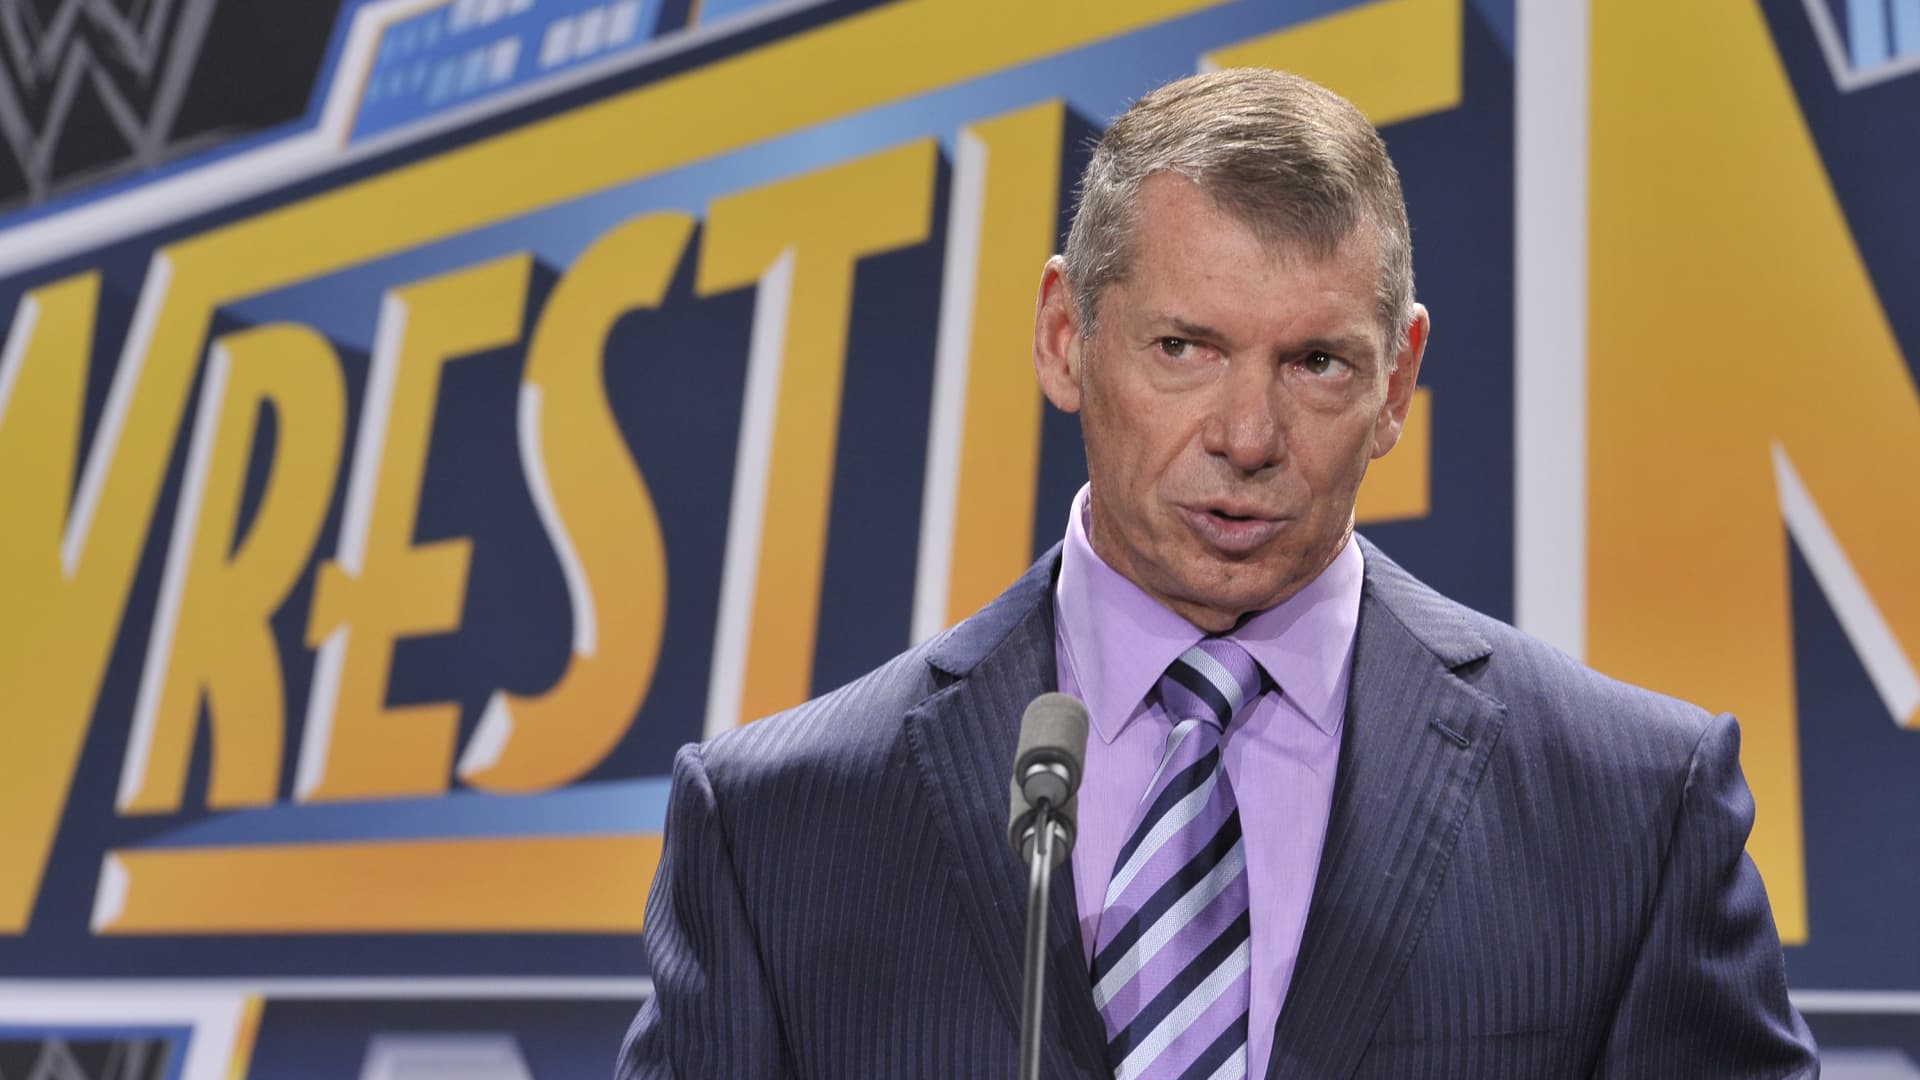 WWE's Vince McMahon paid $12 million to settle misconduct allegations, report says